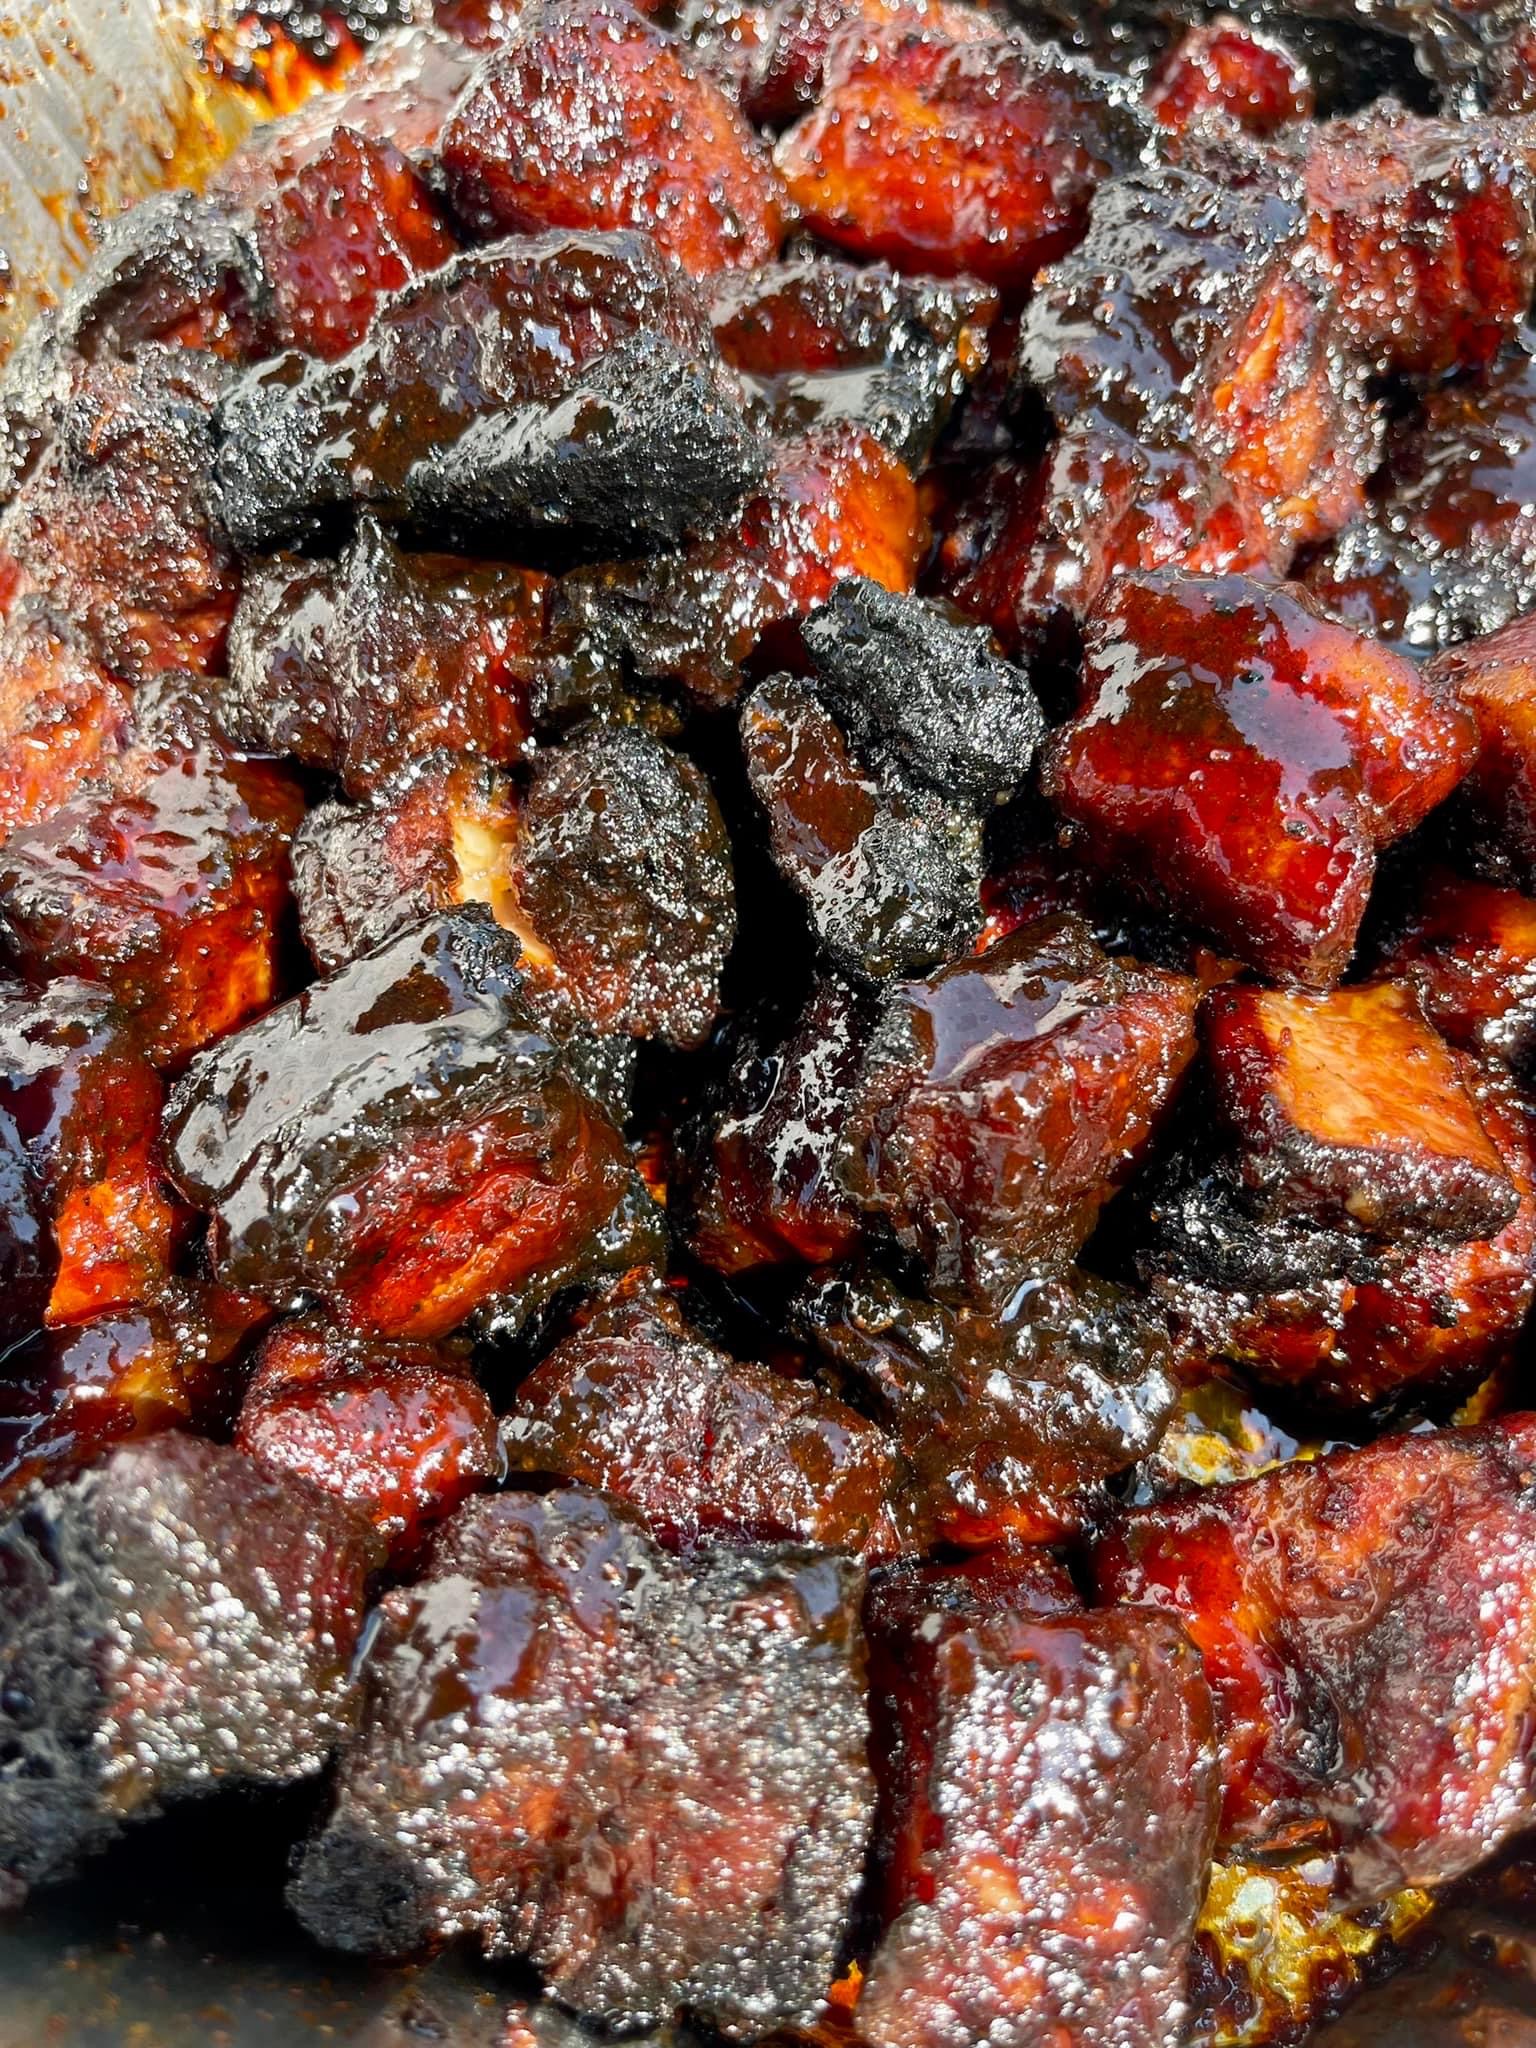 https://www.barbecuenews.com/wp-content/uploads/2022/09/smoked-pork-belly-burnt-ends.jpeg